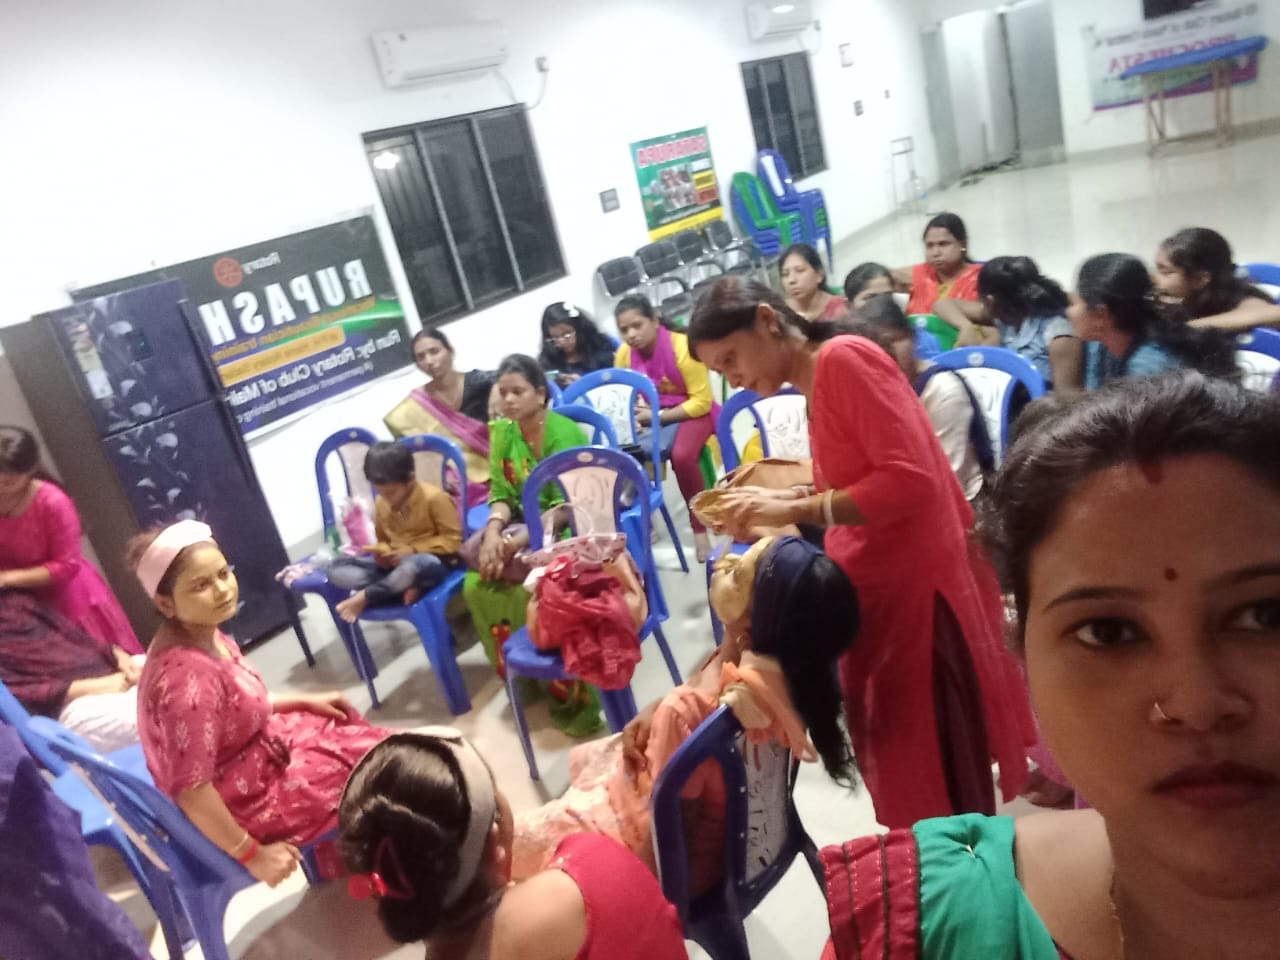 Beautician vocational training called “Rupasree”